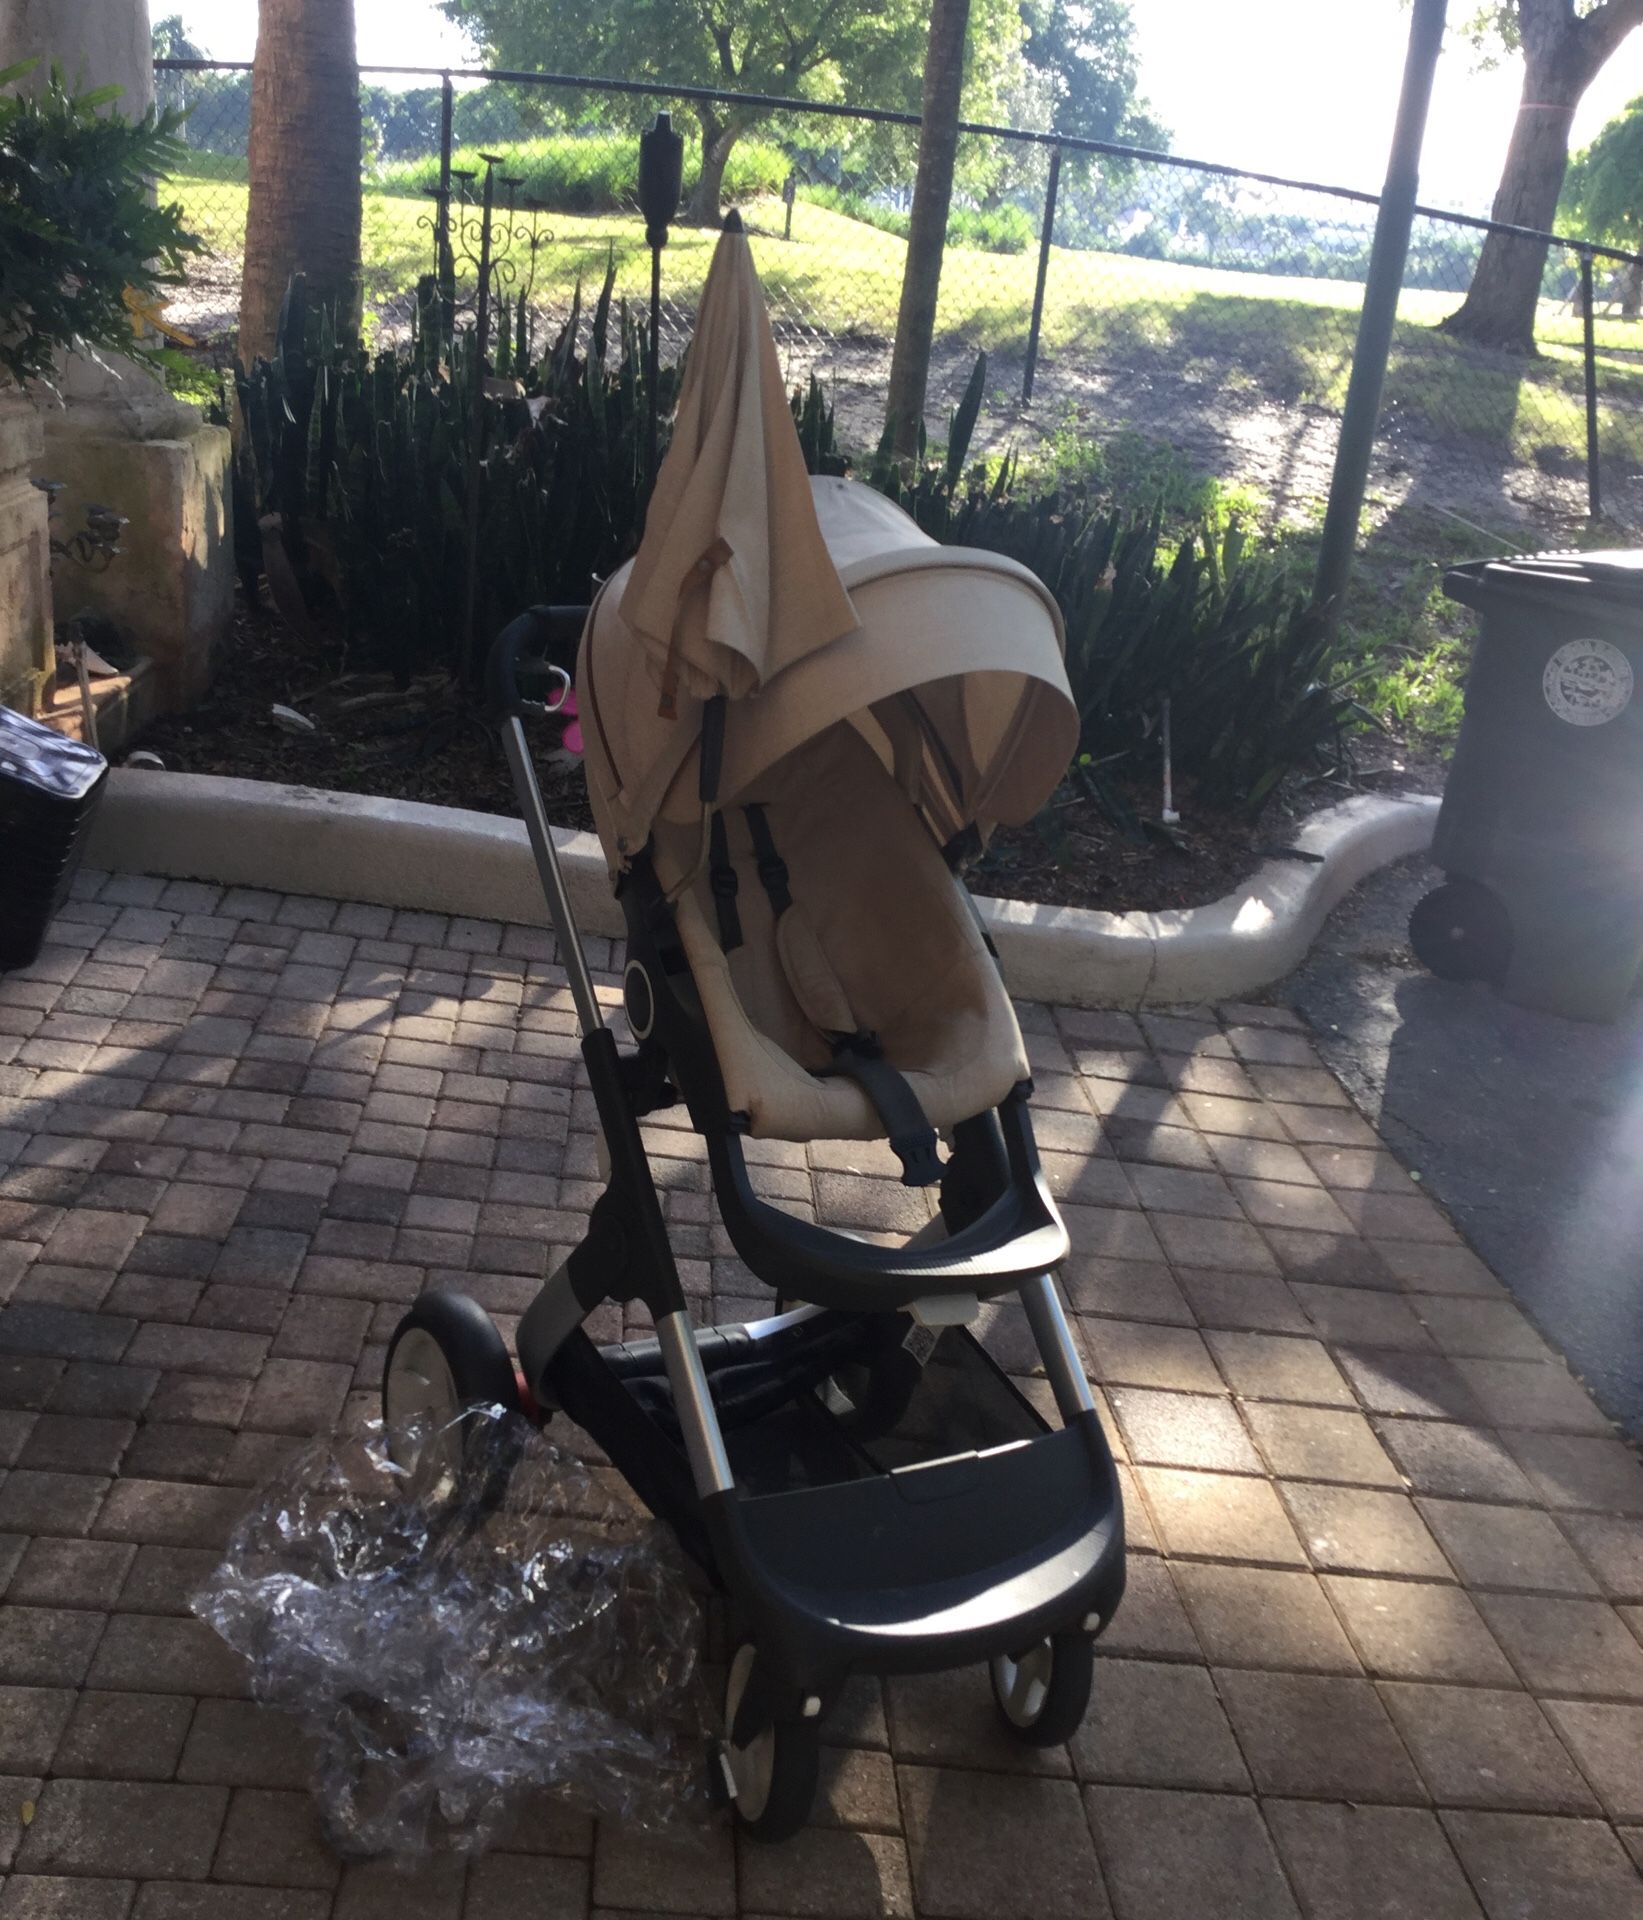 Used Stokke stroller with accessories.